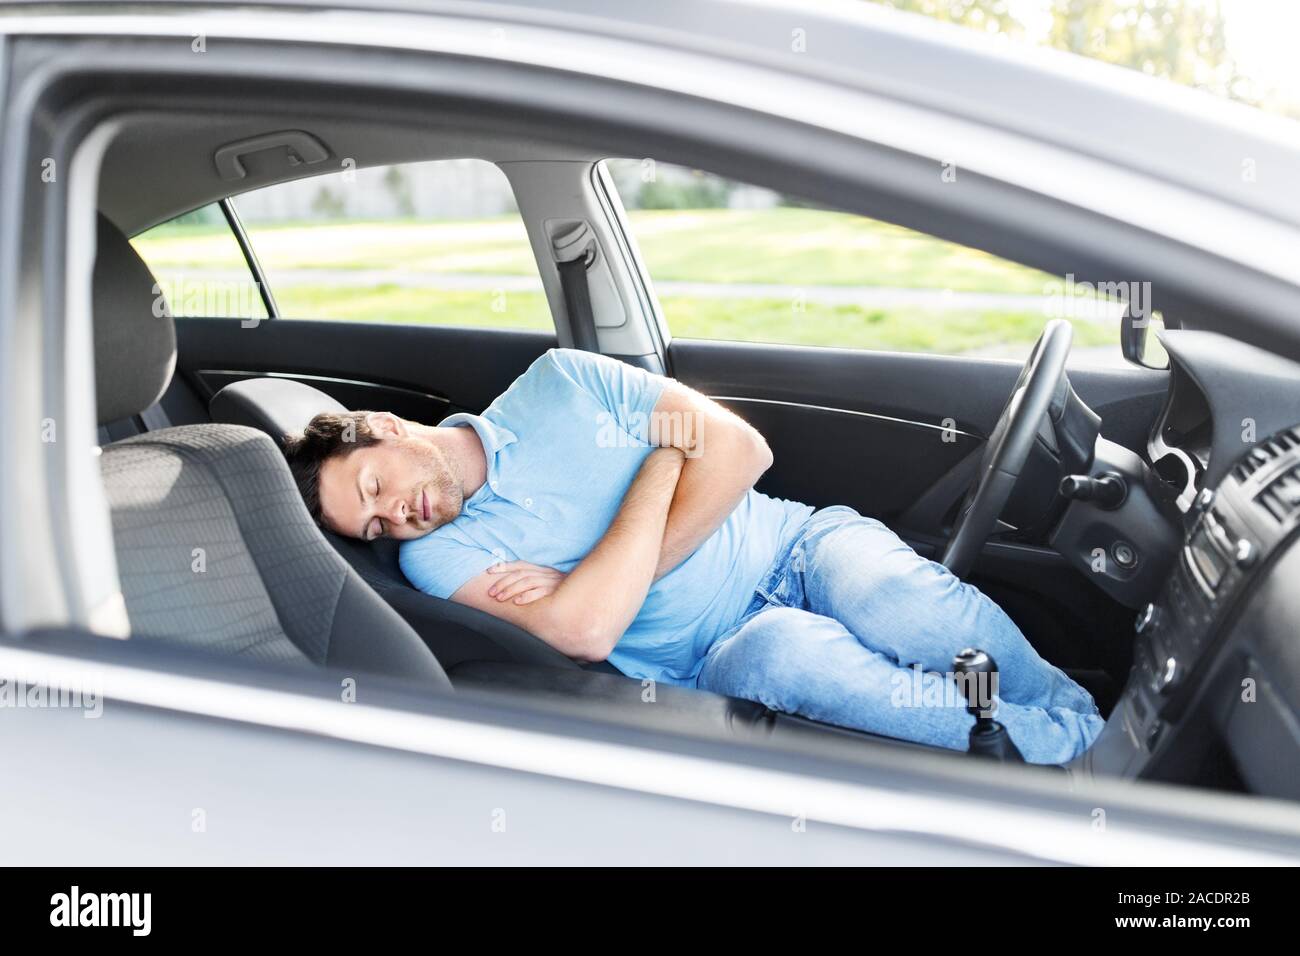 https://c8.alamy.com/comp/2ACDR2B/tired-man-or-driver-sleeping-in-car-2ACDR2B.jpg